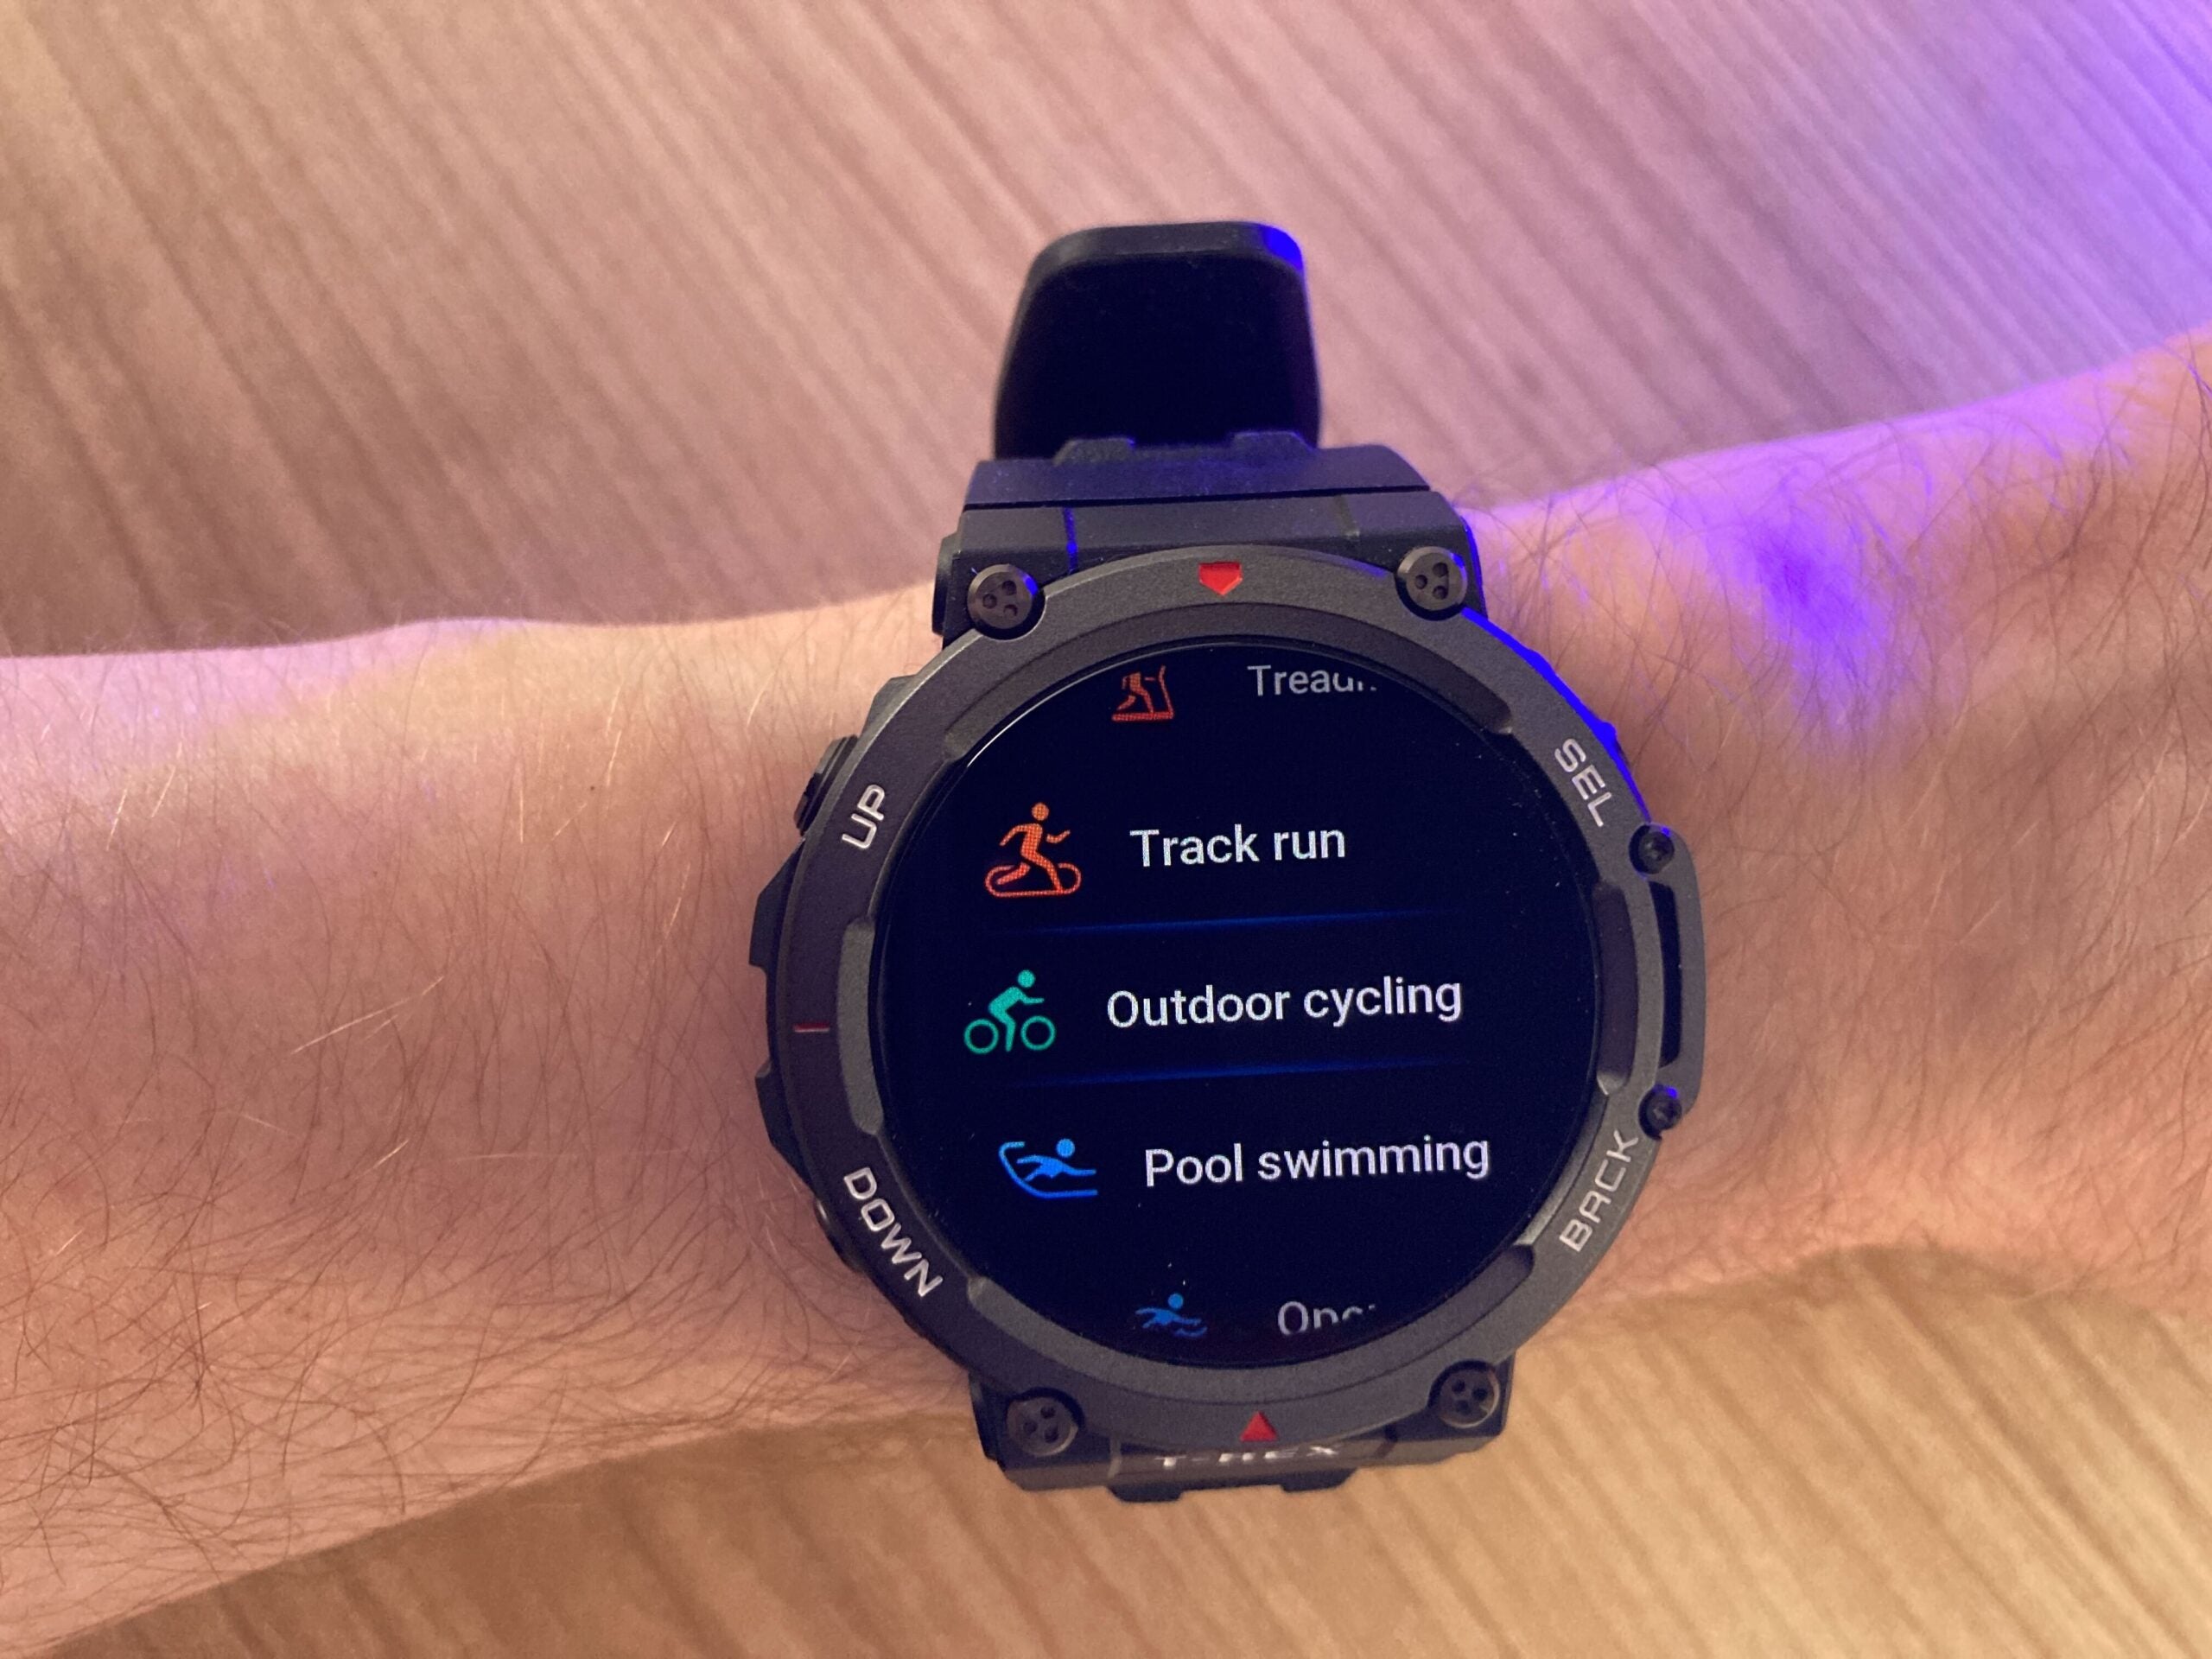 Amazfit T-Rex 2 review - A durable and rugged GPS smartwatch for